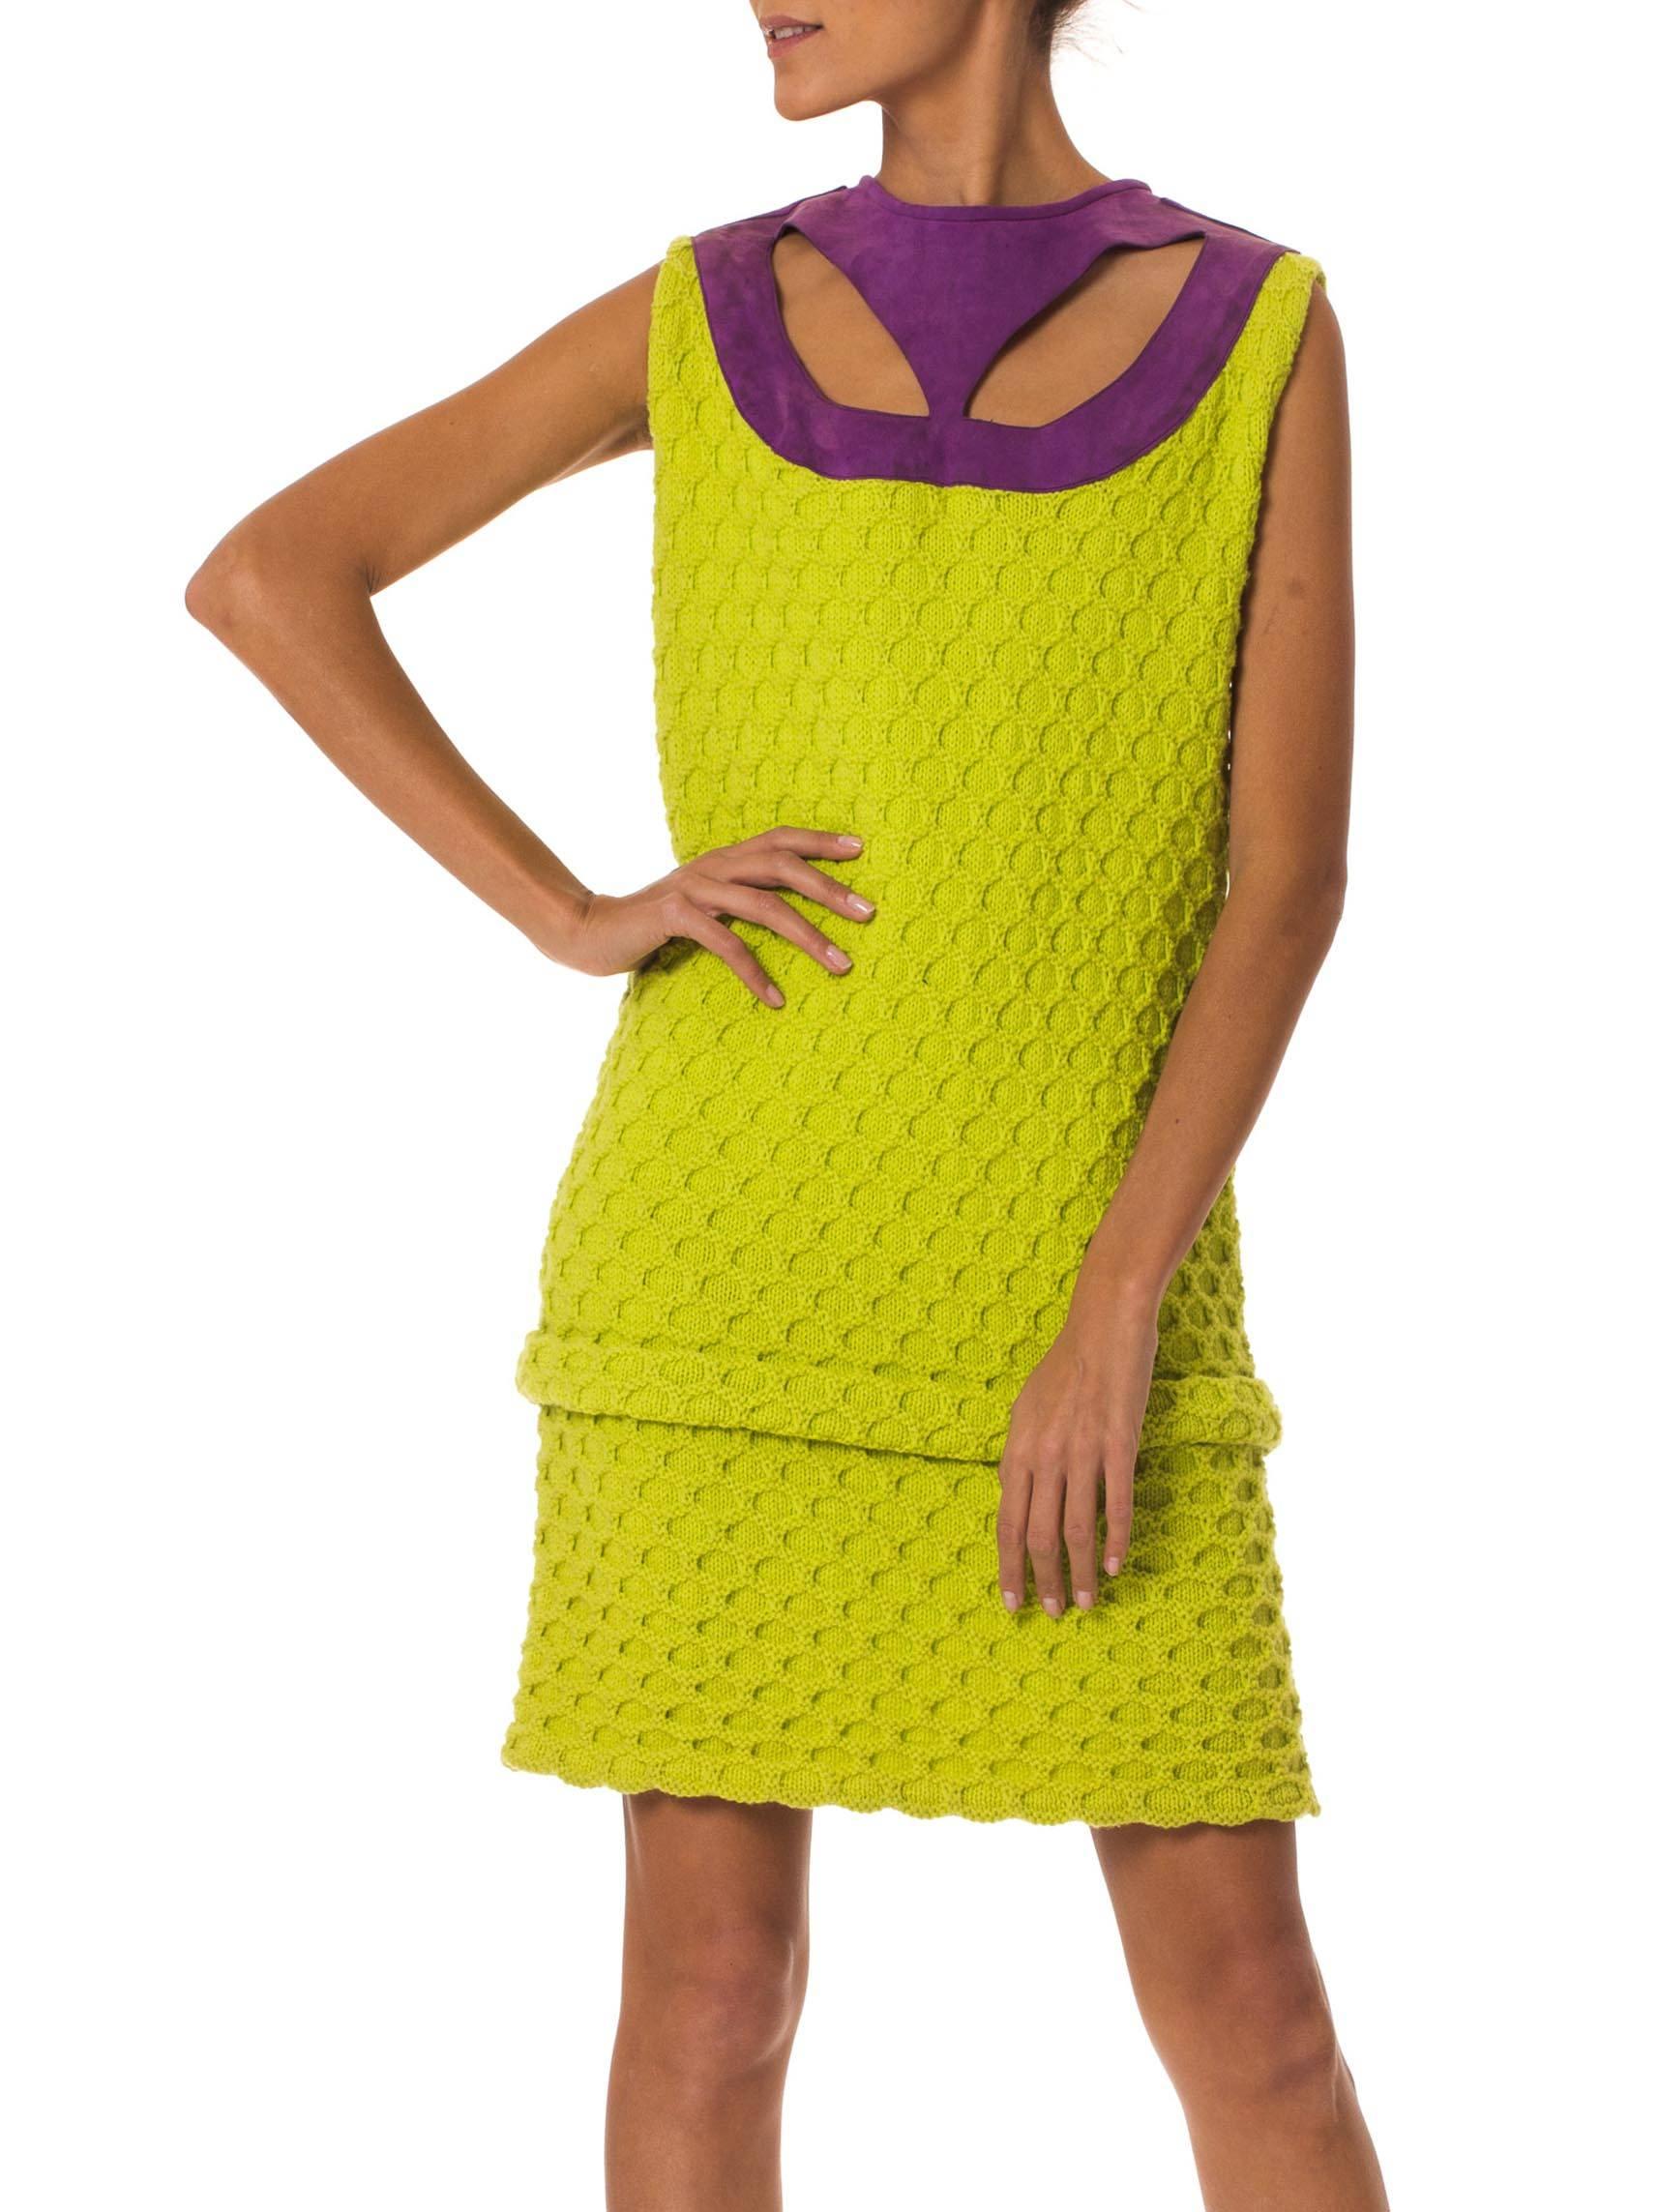 lime green and purple dress